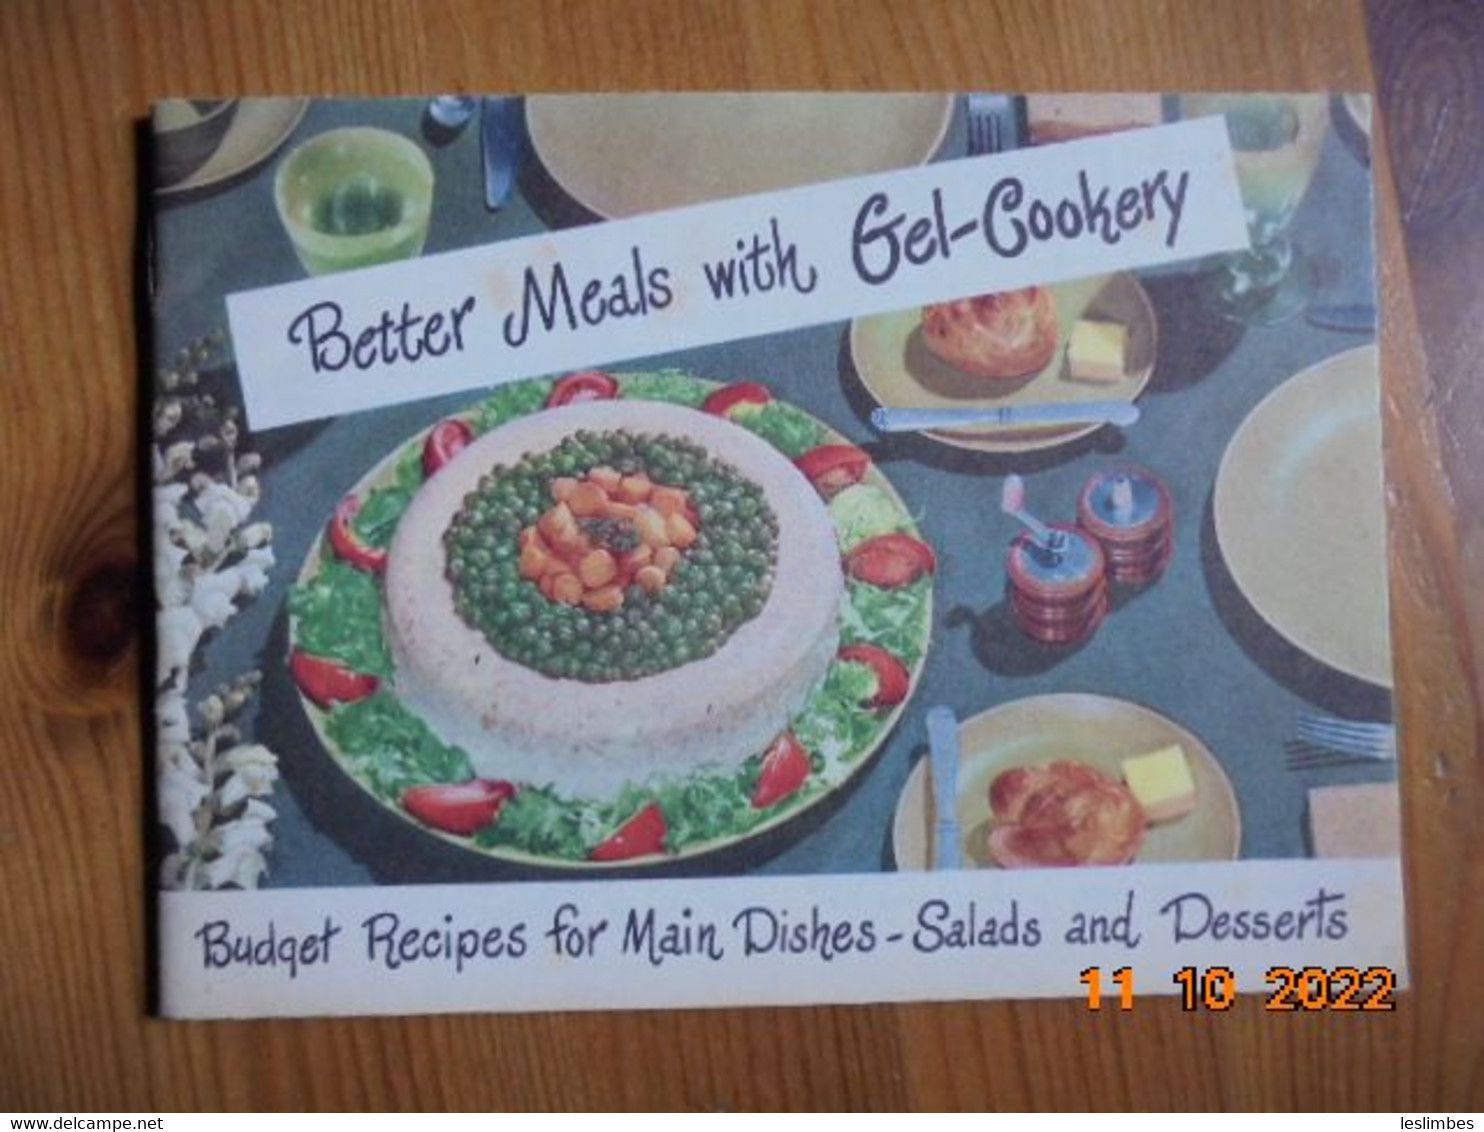 Better Meals With Gel Cookery : Budget Recipes For Main Dishes, Salads And Desserts. Charles B. Knox Gelatine Co. 1952 - Nordamerika